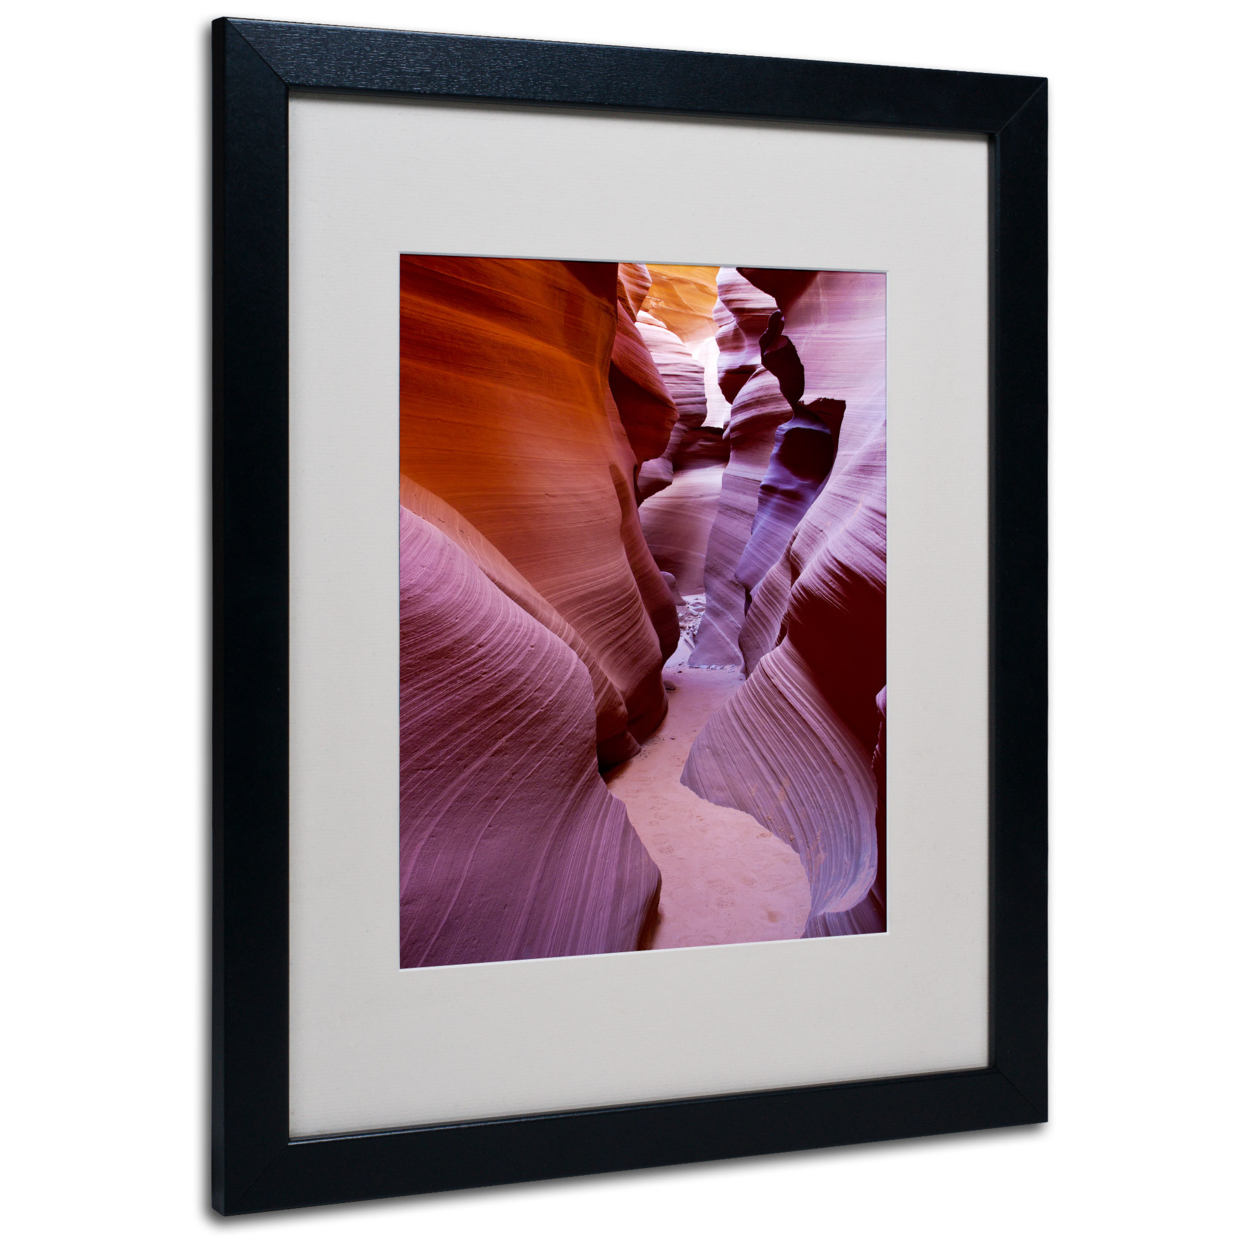 Pierre Leclerc 'Antelope Canyon 2' Black Wooden Framed Art 18 X 22 Inches